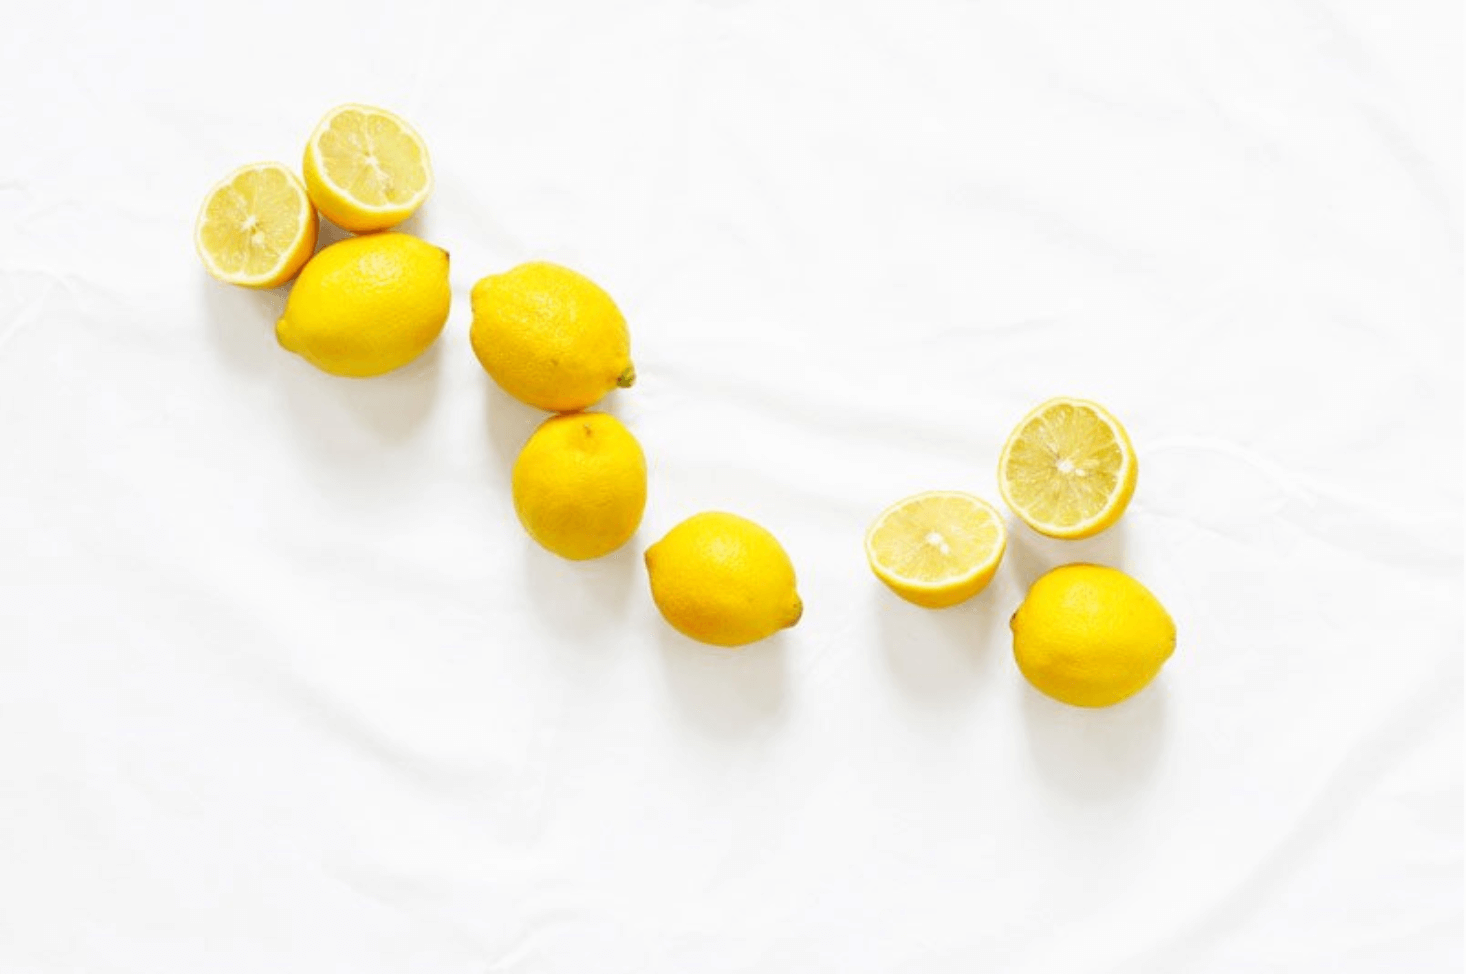 Add a slice of lemon to your morning routine